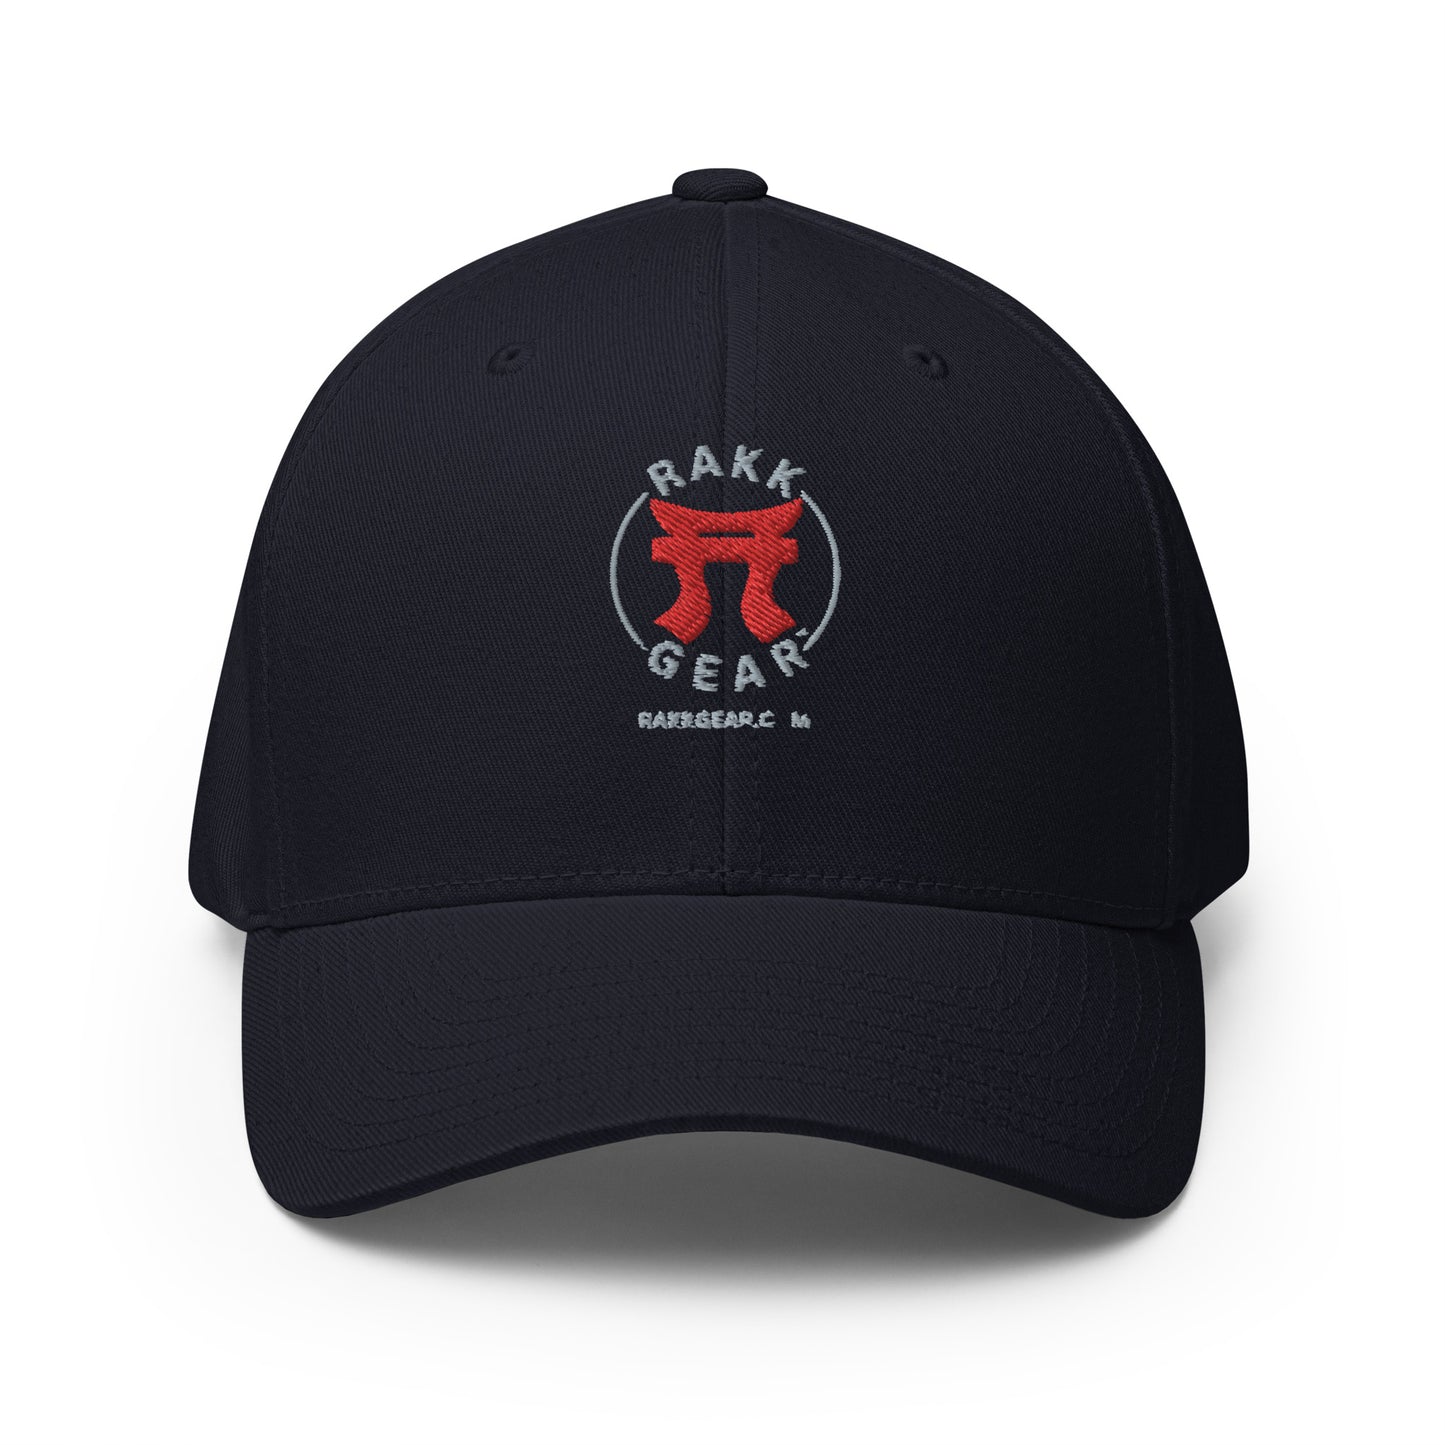 Rakkgear Embroidered  Black Fitted Baseball Cap: Stylish cap with Iconic Rakkgear Logo embroidery on the front.